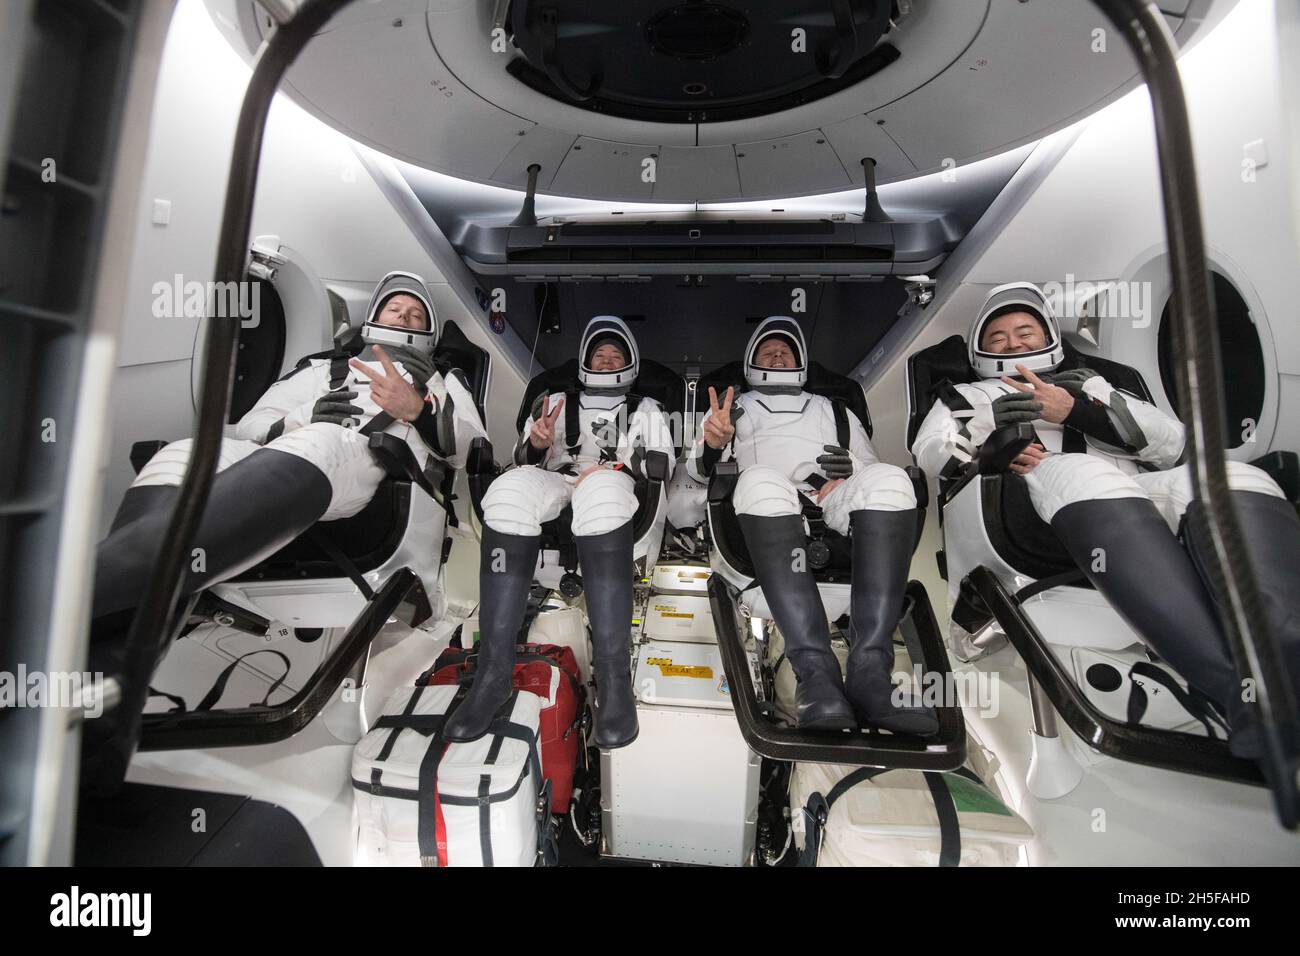 Pensecola, United States Of America. 08th Nov, 2021. Pensecola, United States of America. 08 November, 2021. SpaceX Crew 2 crew members signal they are okay after the hatch is opened on the SpaceX Crew Dragon Endeavour in the Gulf of Mexico November 8, 2021 off the coast of Pensecola, Florida. Sitting left to right are: ESA astronaut Thomas Pesquet, NASA astronauts Megan McArthur, Shane Kimbrough and JAXA astronaut Aki Hoshide.Credit: Aubrey Gemignani/NASA/Alamy Live News Stock Photo